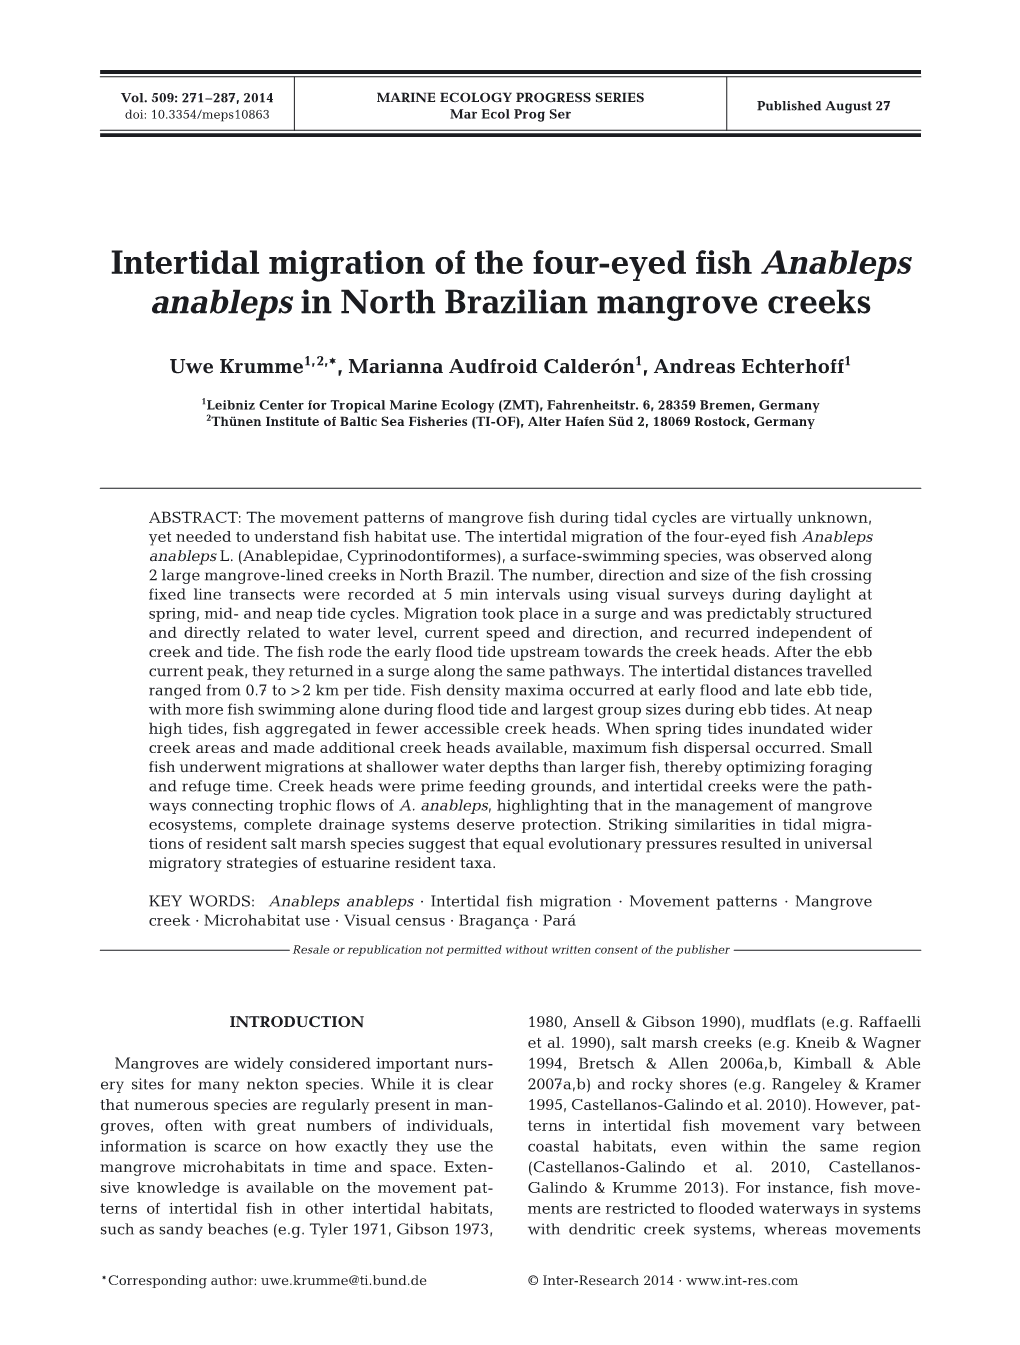 Intertidal Migration of the Four-Eyed Fish Anableps Anableps in North Brazilian Mangrove Creeks